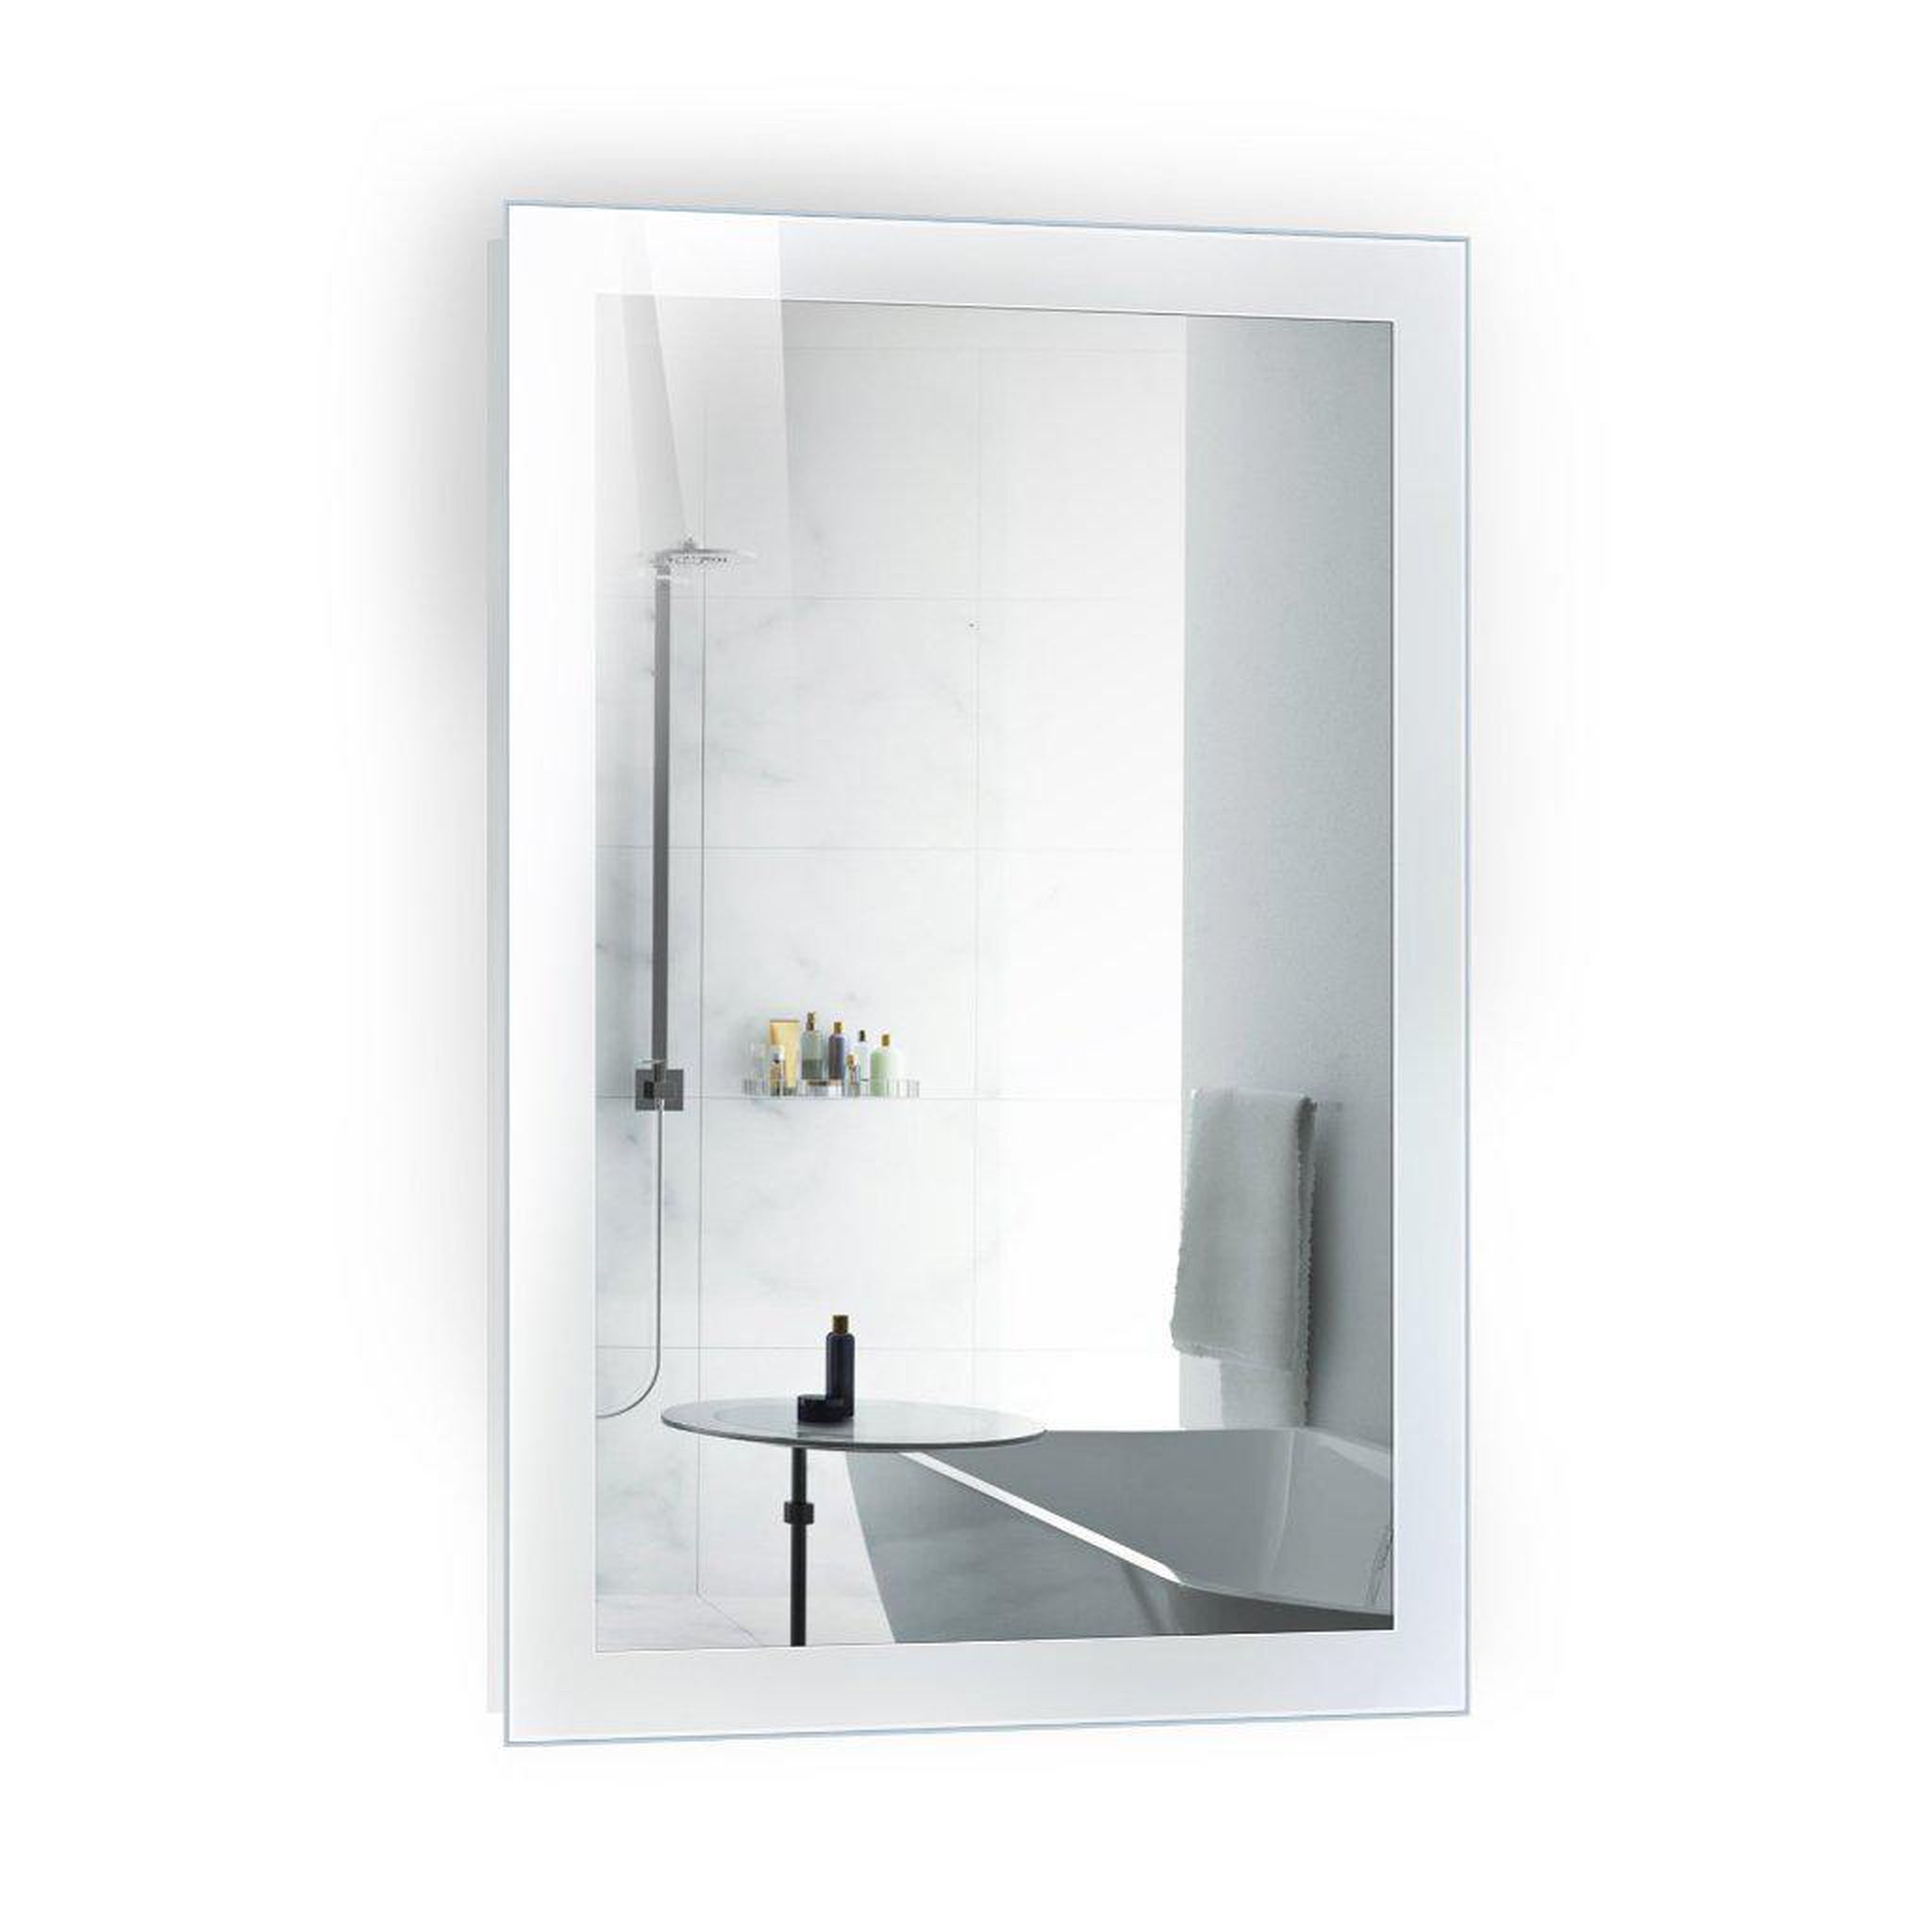 Krugg Reflections, Krugg Reflections Stella 24" x 36" 5000K Rectangular Wall-Mounted Silver-Backed LED Bathroom Vanity Mirror With Built-in Defogger and Dimmer